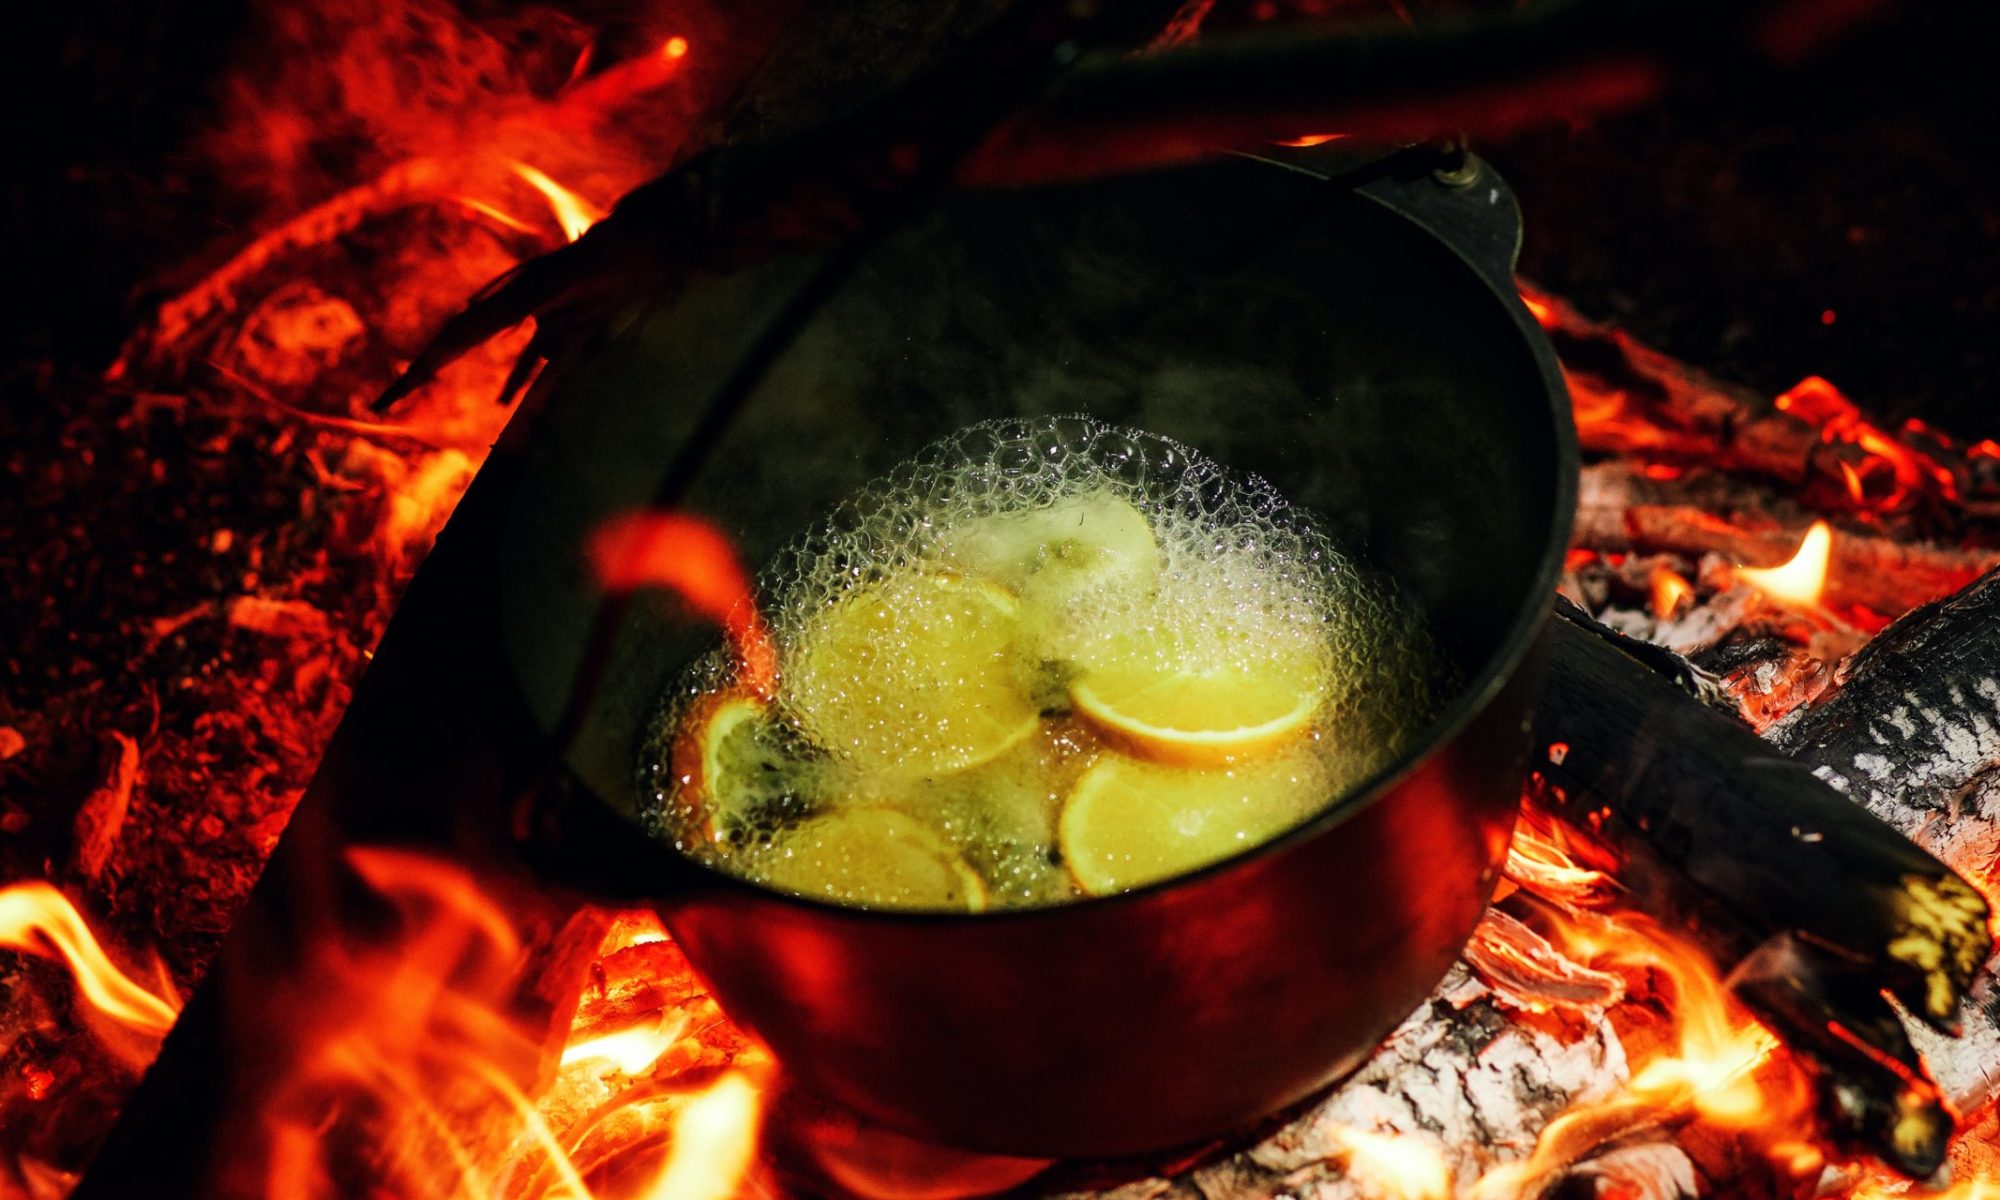 The cauldron is boiling on the coals of the fire. In a camping boiler on a halt, mulled wine with lemon and spices is cooked.